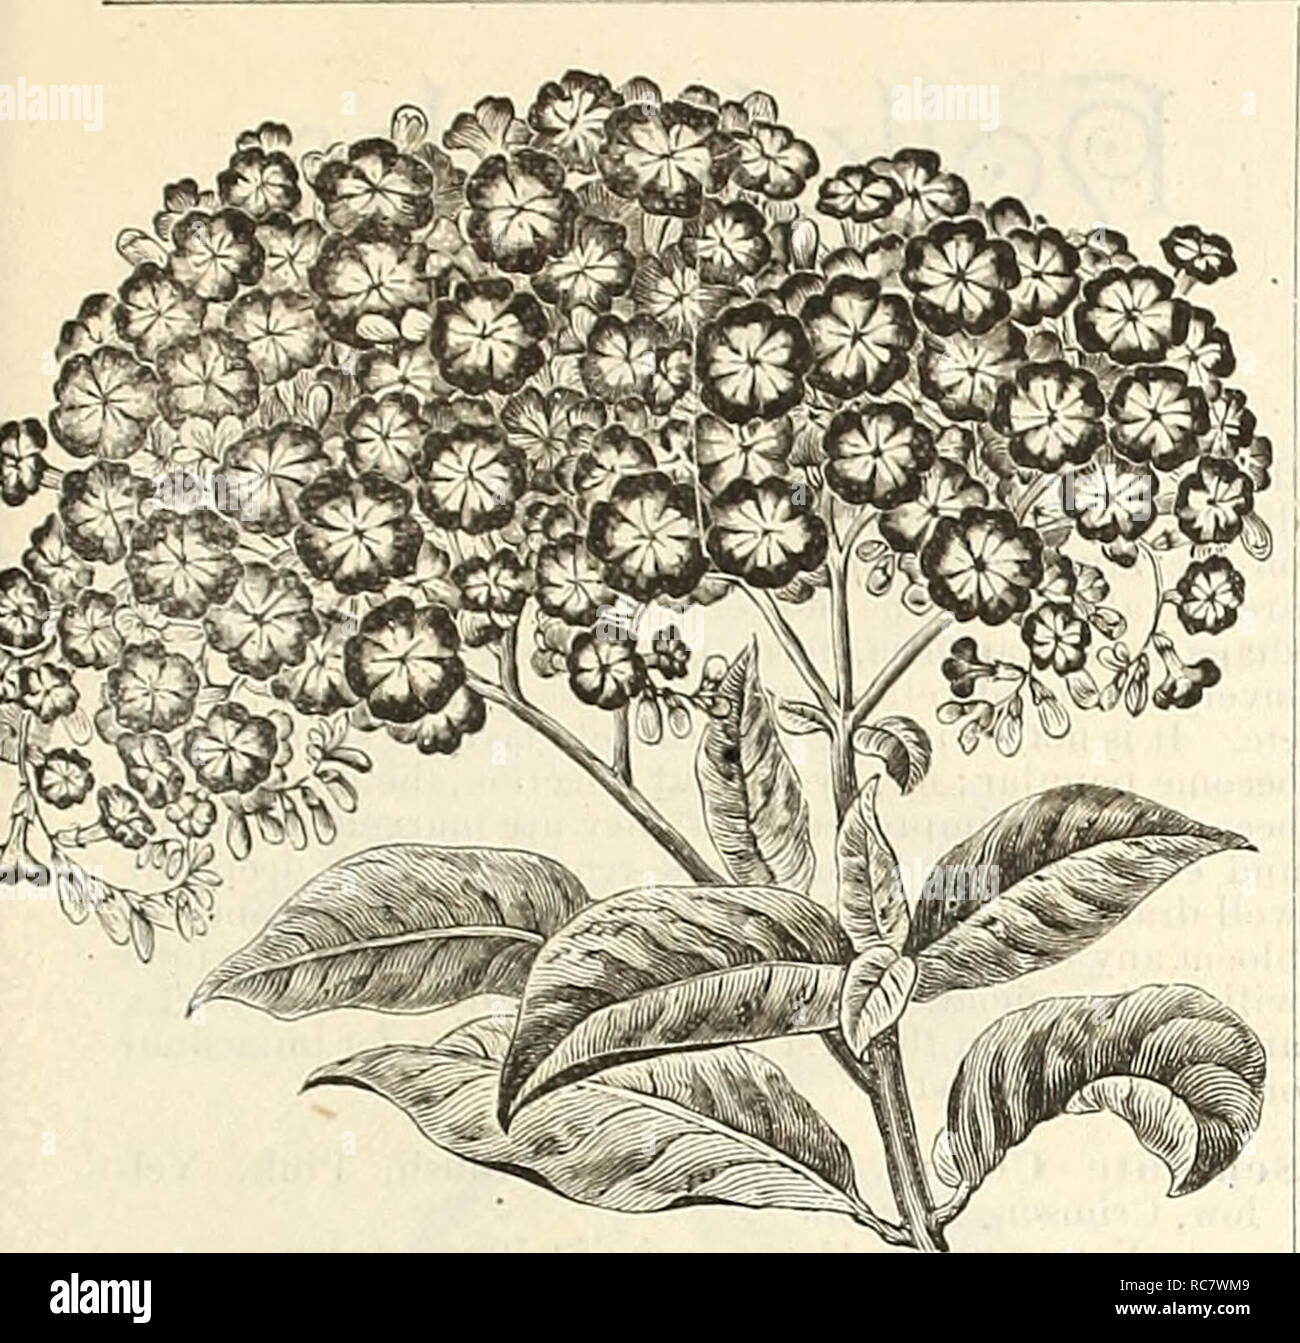 . Dreer's garden calendar for 1888. Seeds Catalogs; Nursery stock Catalogs; Gardening Catalogs; Flowers Seeds Catalogs. GENERAL COLLECTION OF BEDDING PLANTS. 109'. HYDRANGEA S Continued. I'aniculata Grandiflora. See Shrubs. Rhamnus Pictus. A grand variety, producing im- Heliotkope—Queen of the Violets. HELIOTROPE. Chieftain. Lilac, large truss. r Grandiflorum. Pale lilac. Mad. de Bloiiay. Large truss, nearly pure white. Mrs. D. Woods. Deep violet-purple; very free, and desirable sort; trusses large ; the flowers are slightly double. Queen of the Violets. Of the deepest violet purple, with lar Stock Photo